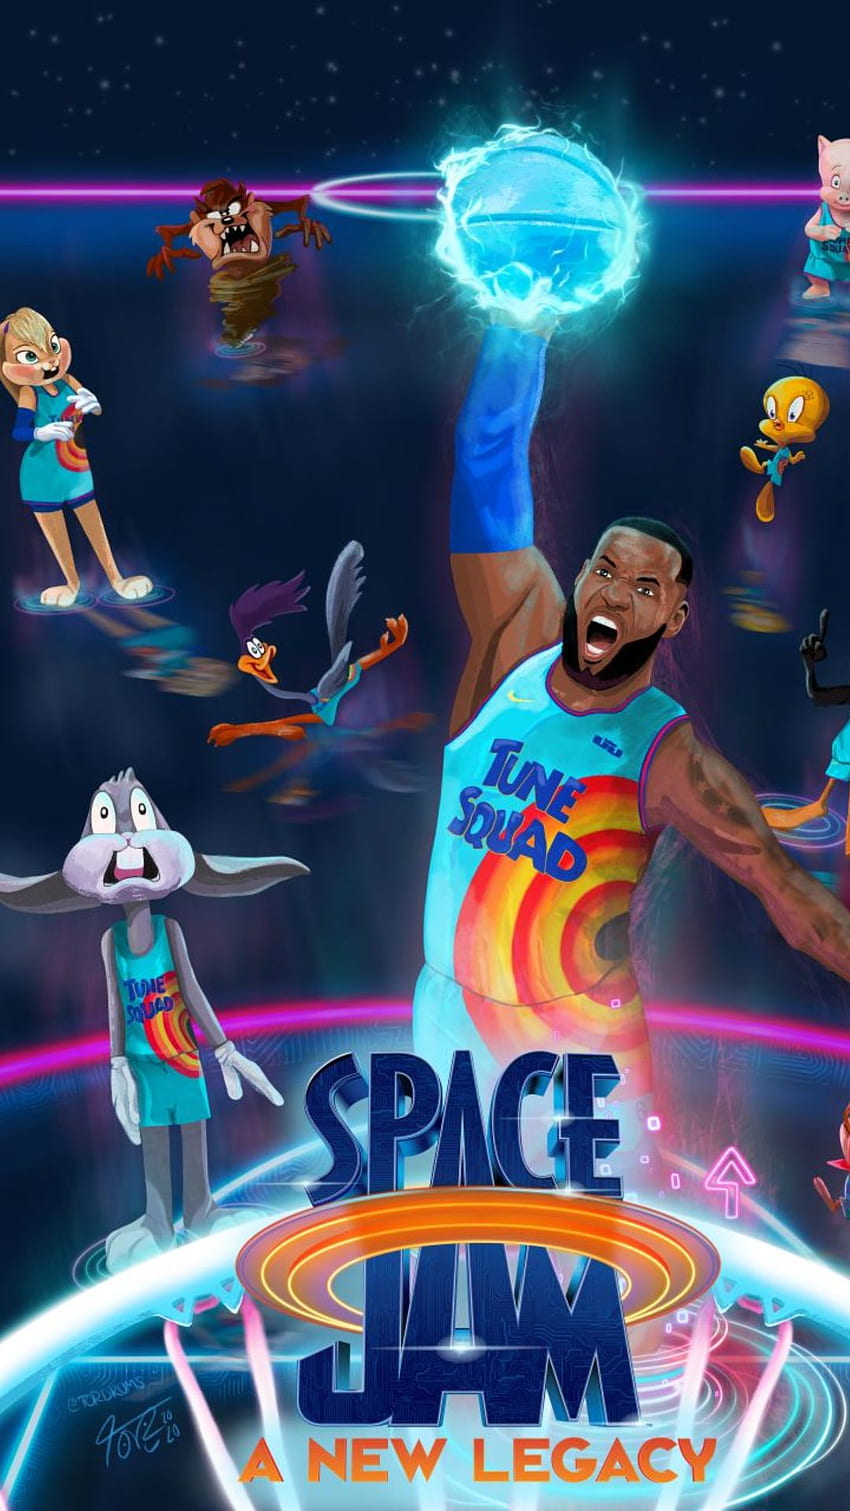 Space Jam: A New Legacy Wallpaper 4K, 2021 Movies, Comedy